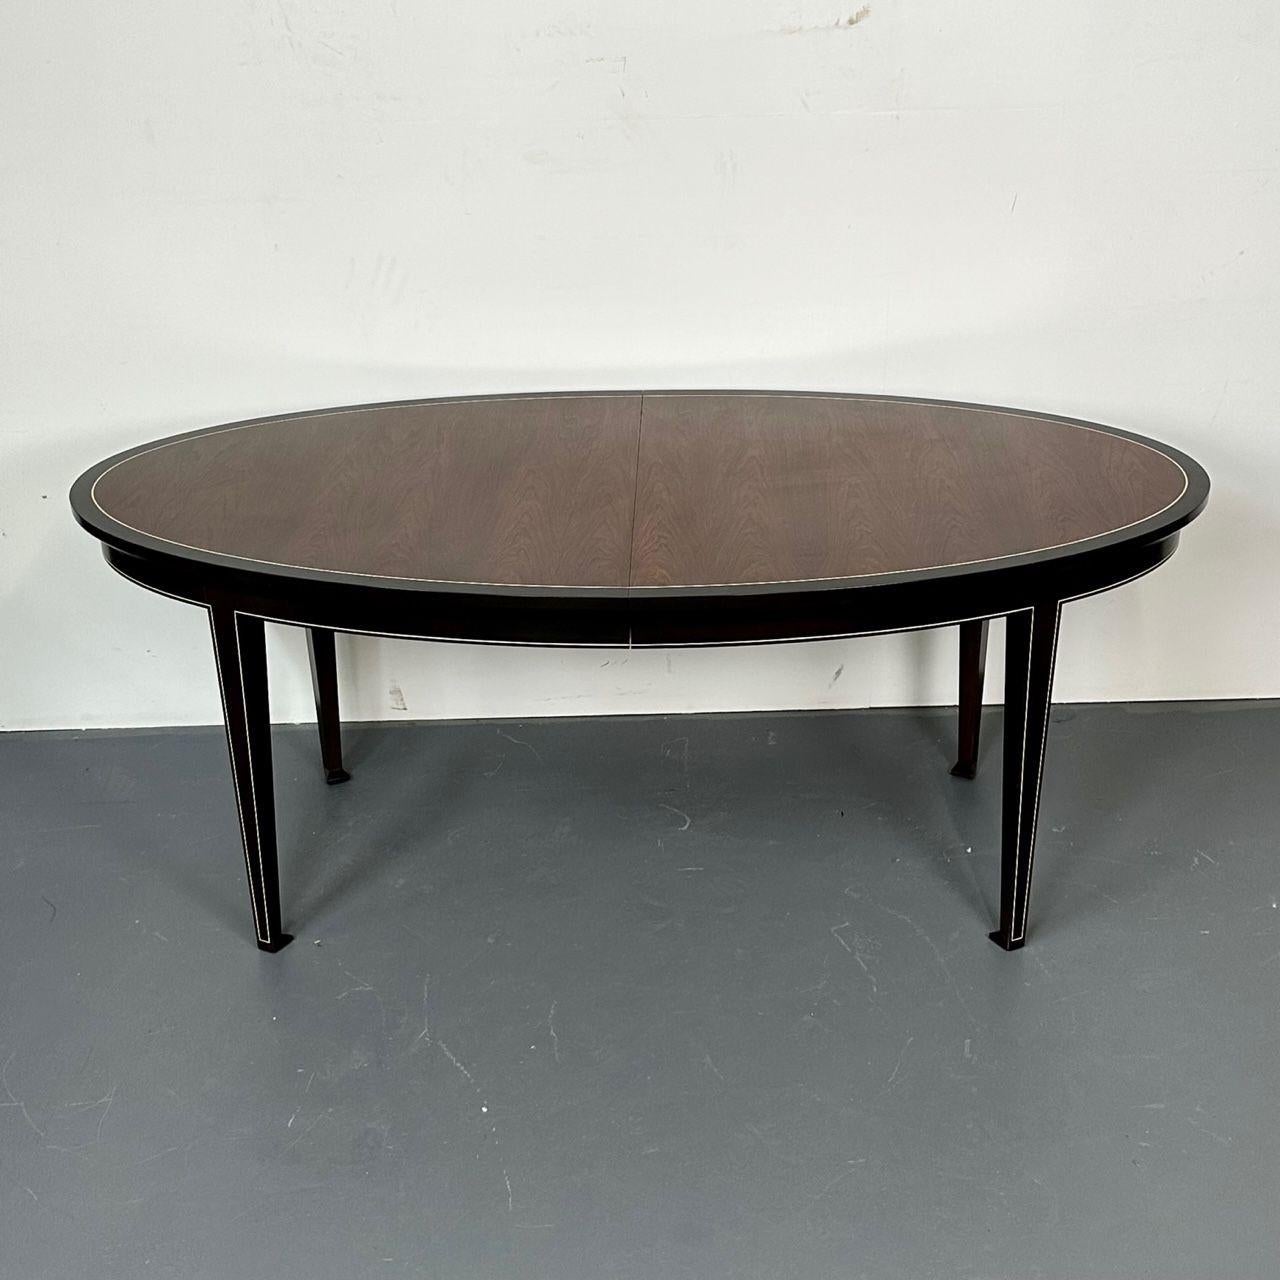 Dinbar, American Mid-Century, Art Deco, Dining Table, Rosewood, Ebony Paint In Good Condition For Sale In Stamford, CT